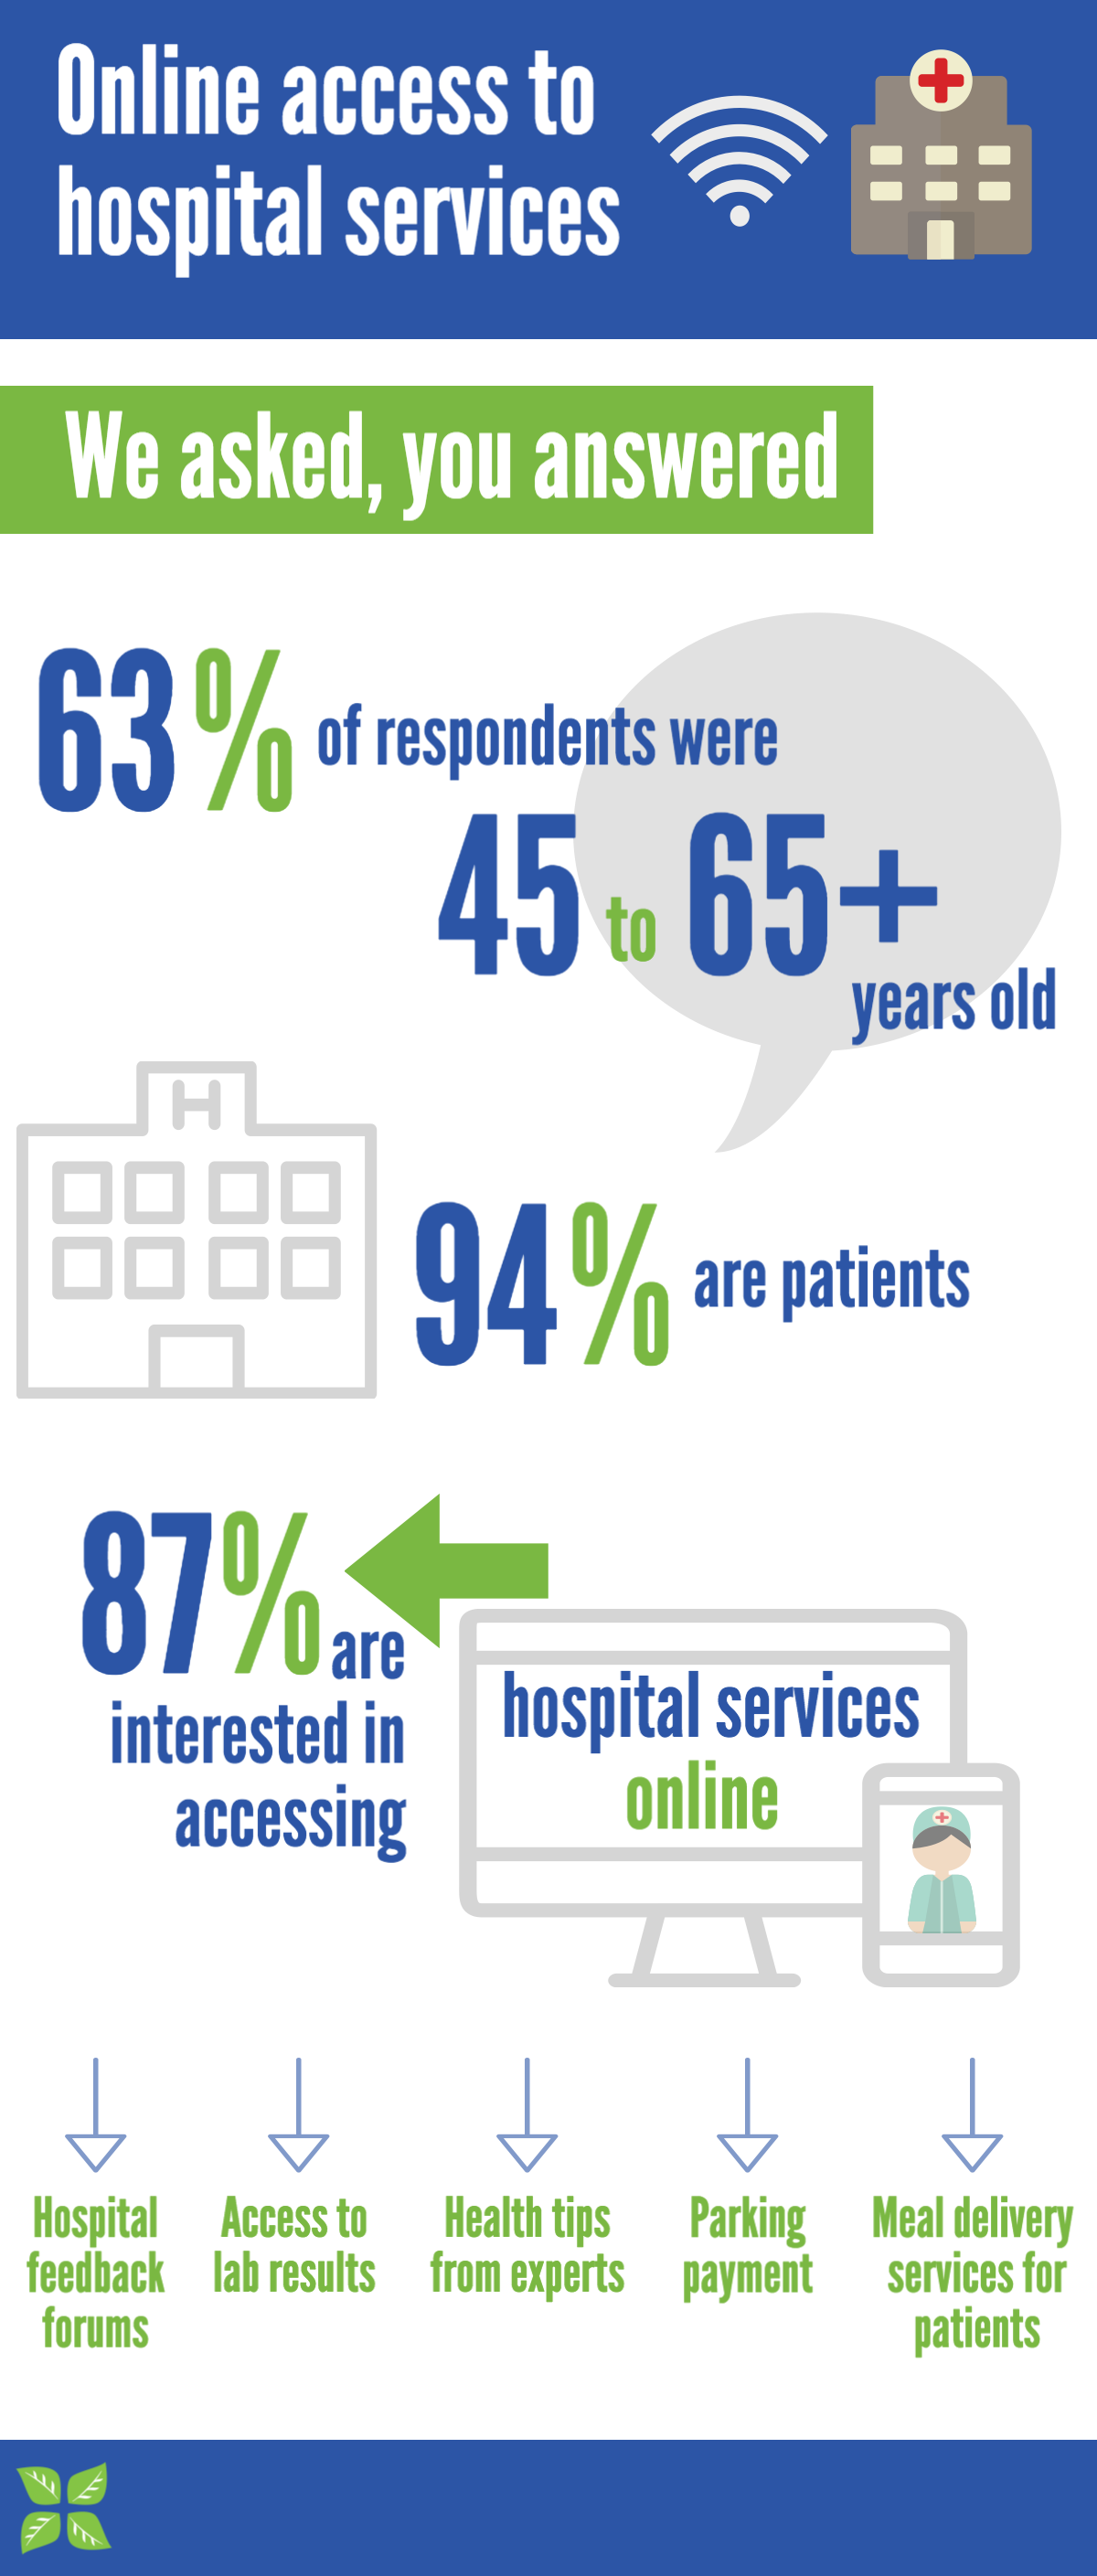 Online access to hospital services survey. Accessible text follows.